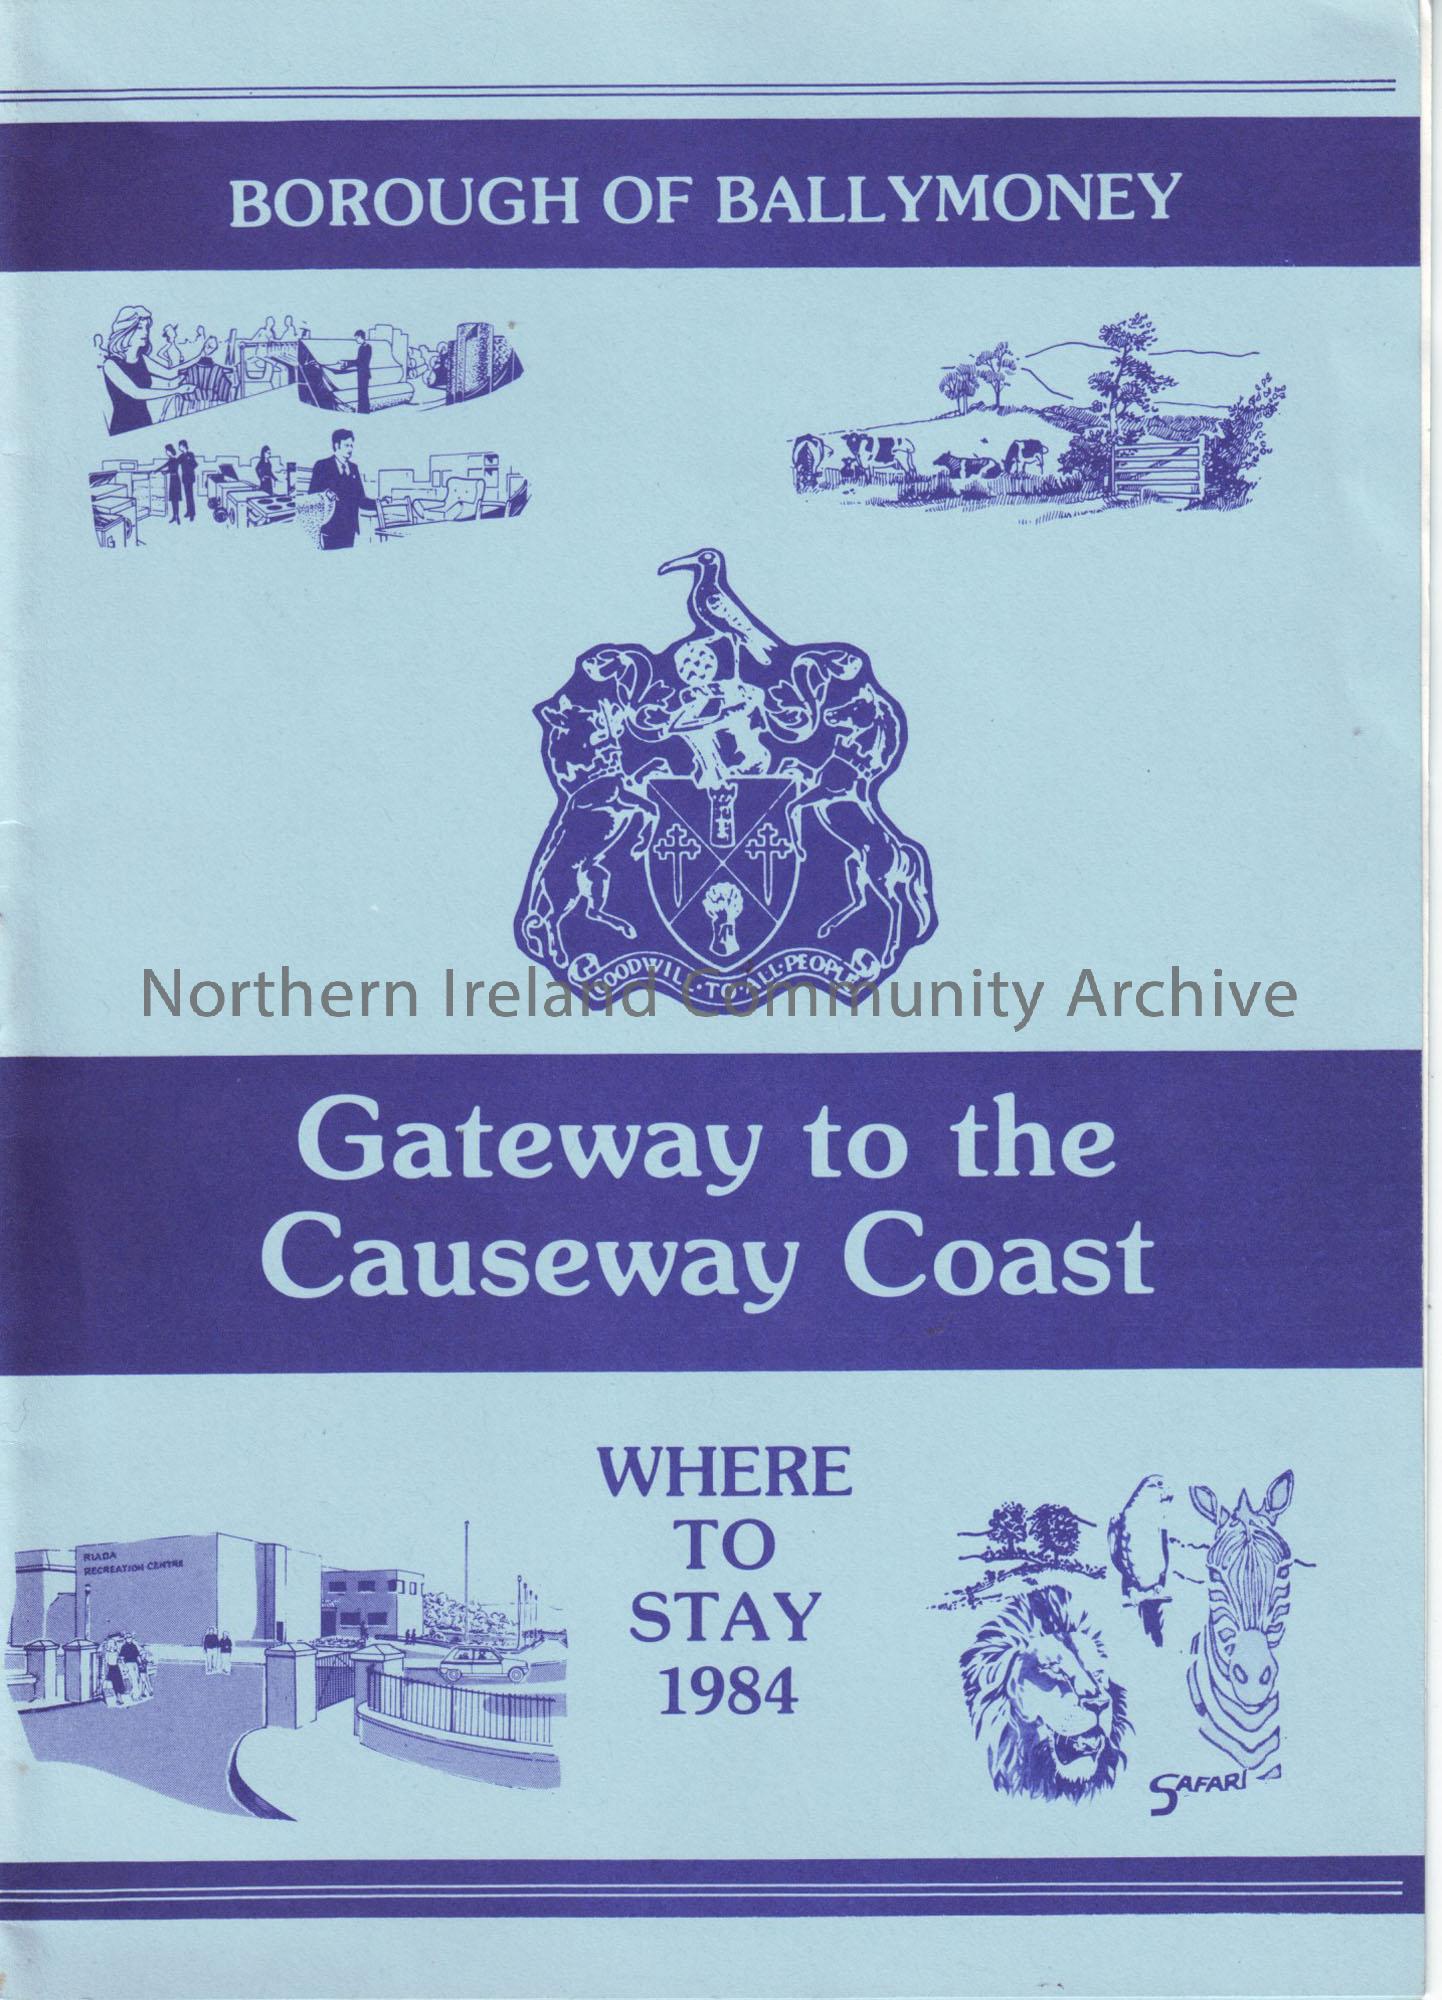 Blue brochure of the Borough of Ballymoney ‘Gateway to the Causeway Coast’ Where to stay 1984